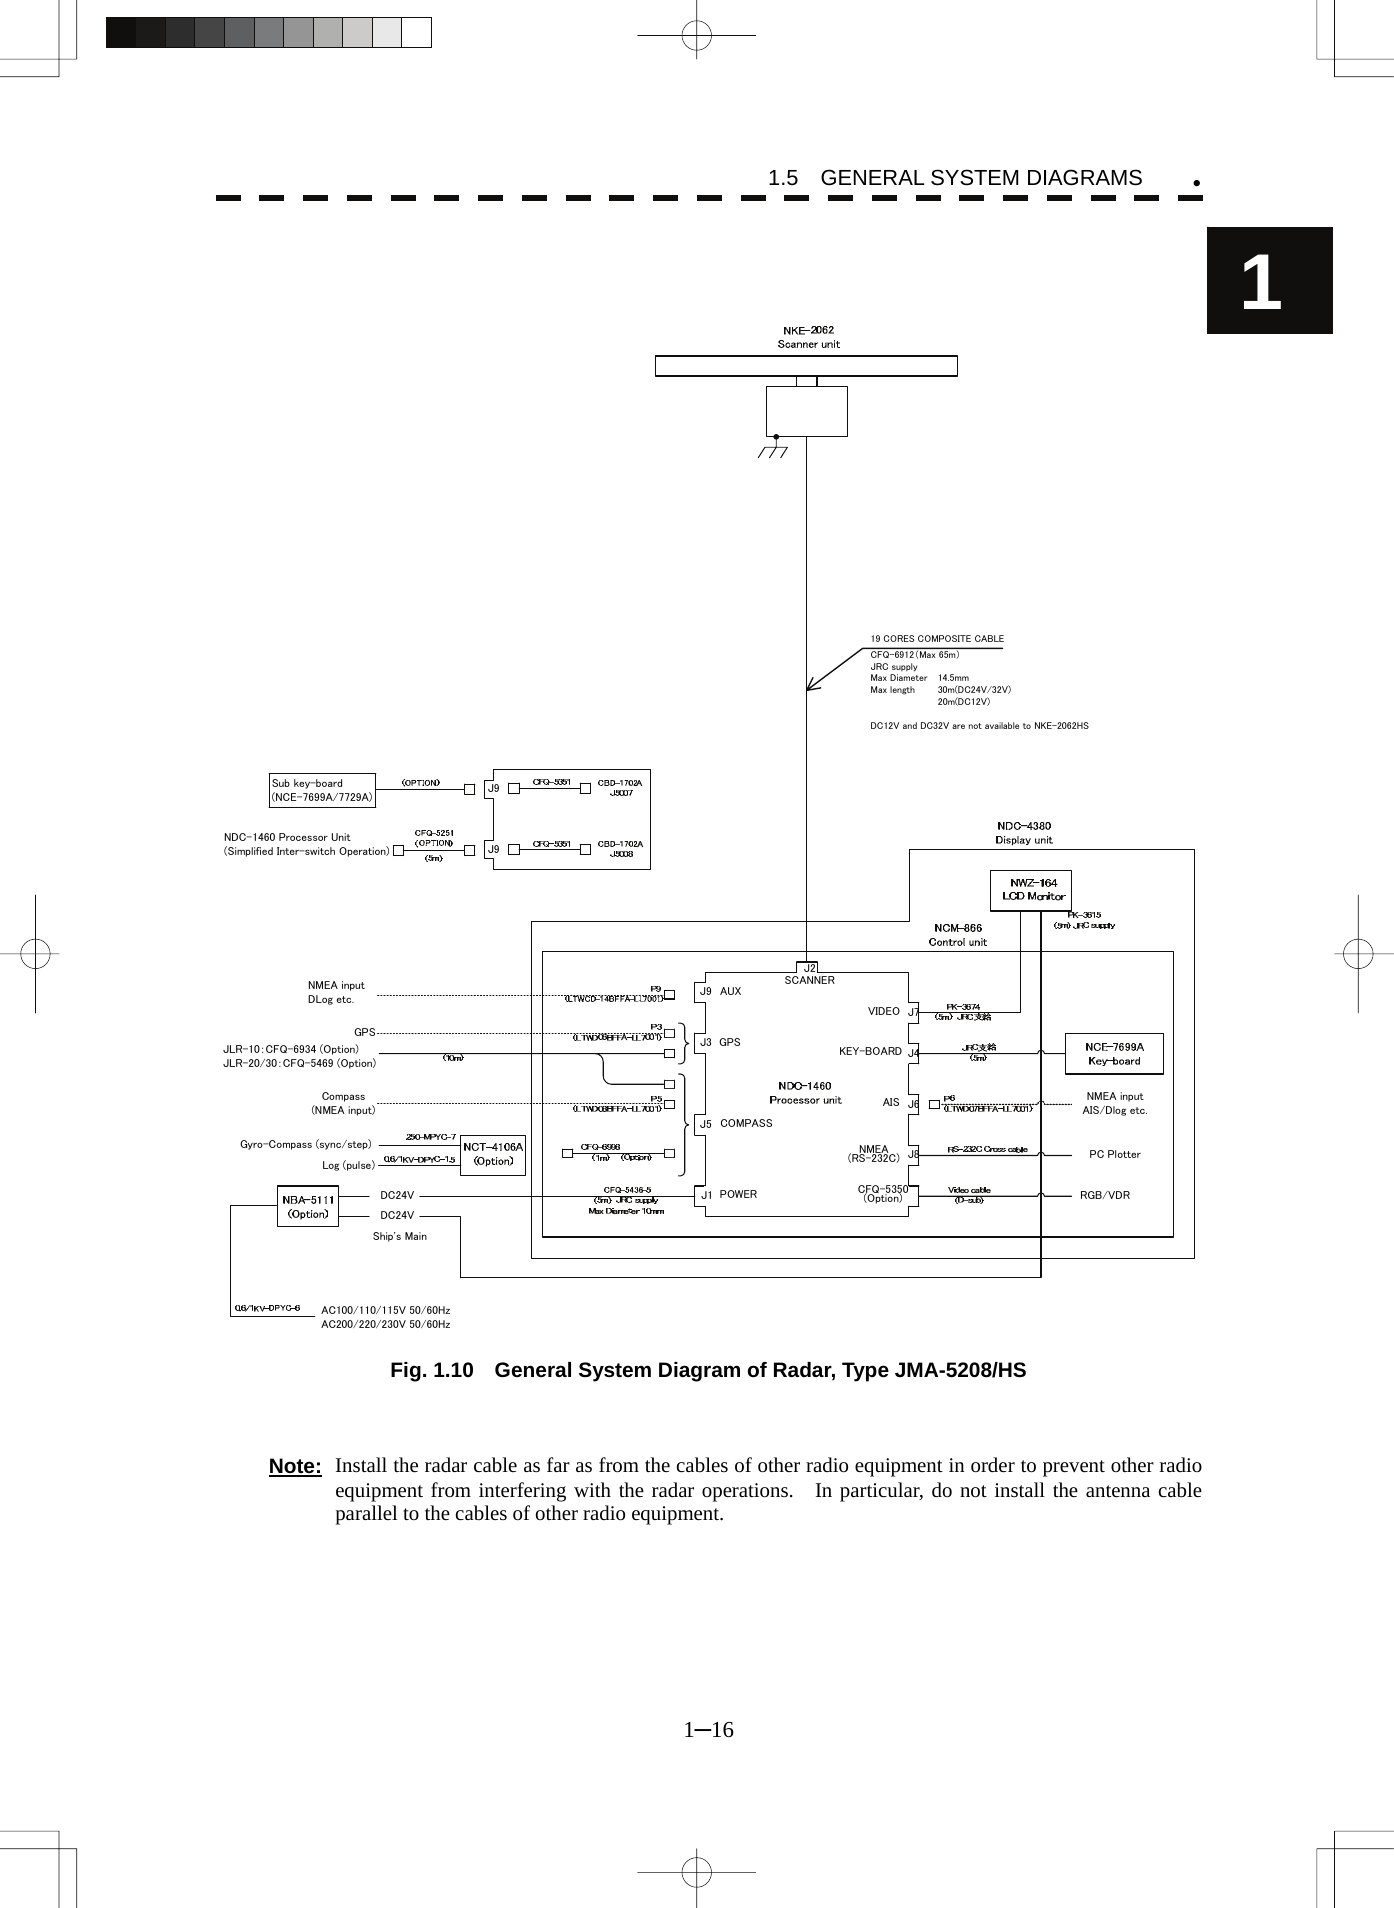 1.5  GENERAL SYSTEM DIAGRAMS 1─16 1y    DC24VCompass(NMEA input)J3SCANNERPOWERKEY-BOARDVIDEOCFQ-5350(Option) RGB/VDRAIS NMEA inputAIS/Dlog etc.NMEA(RS-232C) PC PlotterJ7J4J6J8J1J2AUXJ5J9GPS GPSCOMPASSGyro-Compass (sync/step)Log (pulse)DC24VShip&apos;s MainJLR-10：CFQ-6934 (Option)JLR-20/30：CFQ-5469 (Option)AC100/110/115V 50/60HzAC200/220/230V 50/60HzNMEA inputDLog etc.CFQ-6912（Max 65m）JRC supplyMax Diameter 14.5mmMax length 30m(DC24V/32V)20m(DC12V)DC12V and DC32V are not available to NKE-2062HS19 CORES COMPOSITE CABLEJ9J9NDC-1460 Processor Unit(Simplified Inter-switch Operation)Sub key-board(NCE-7699A/7729A)  Fig. 1.10    General System Diagram of Radar, Type JMA-5208/HS    Note:  Install the radar cable as far as from the cables of other radio equipment in order to prevent other radio equipment from interfering with the radar operations.  In particular, do not install the antenna cable parallel to the cables of other radio equipment. 